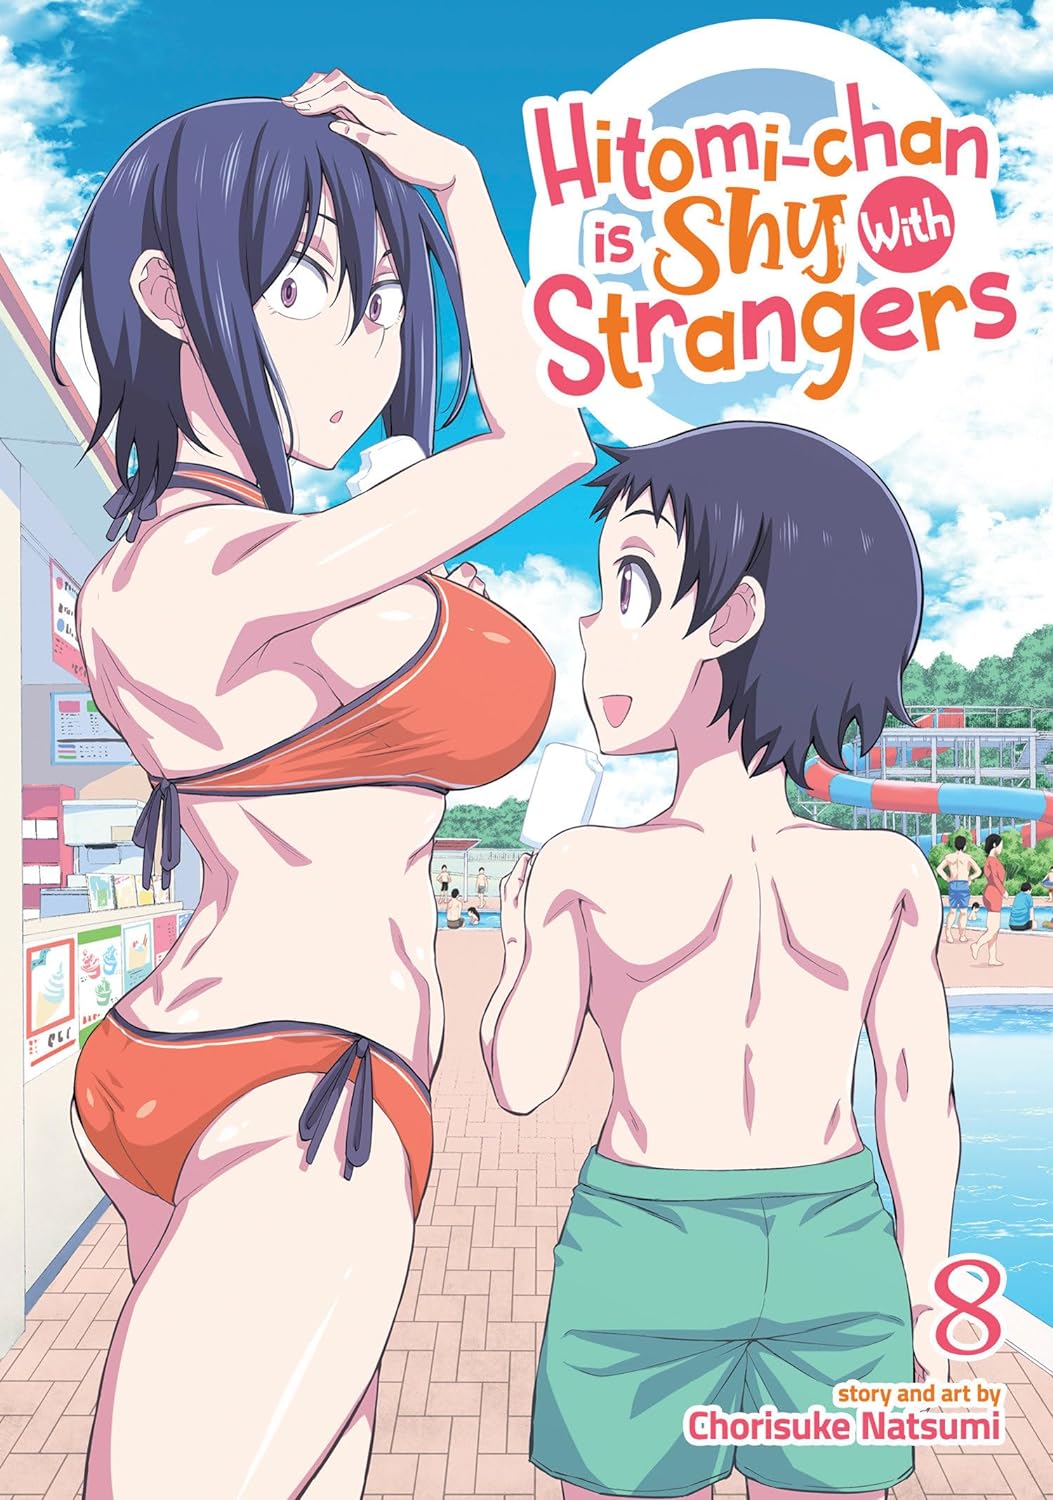 Hitomi-chan is Shy With Strangers Vol. 08